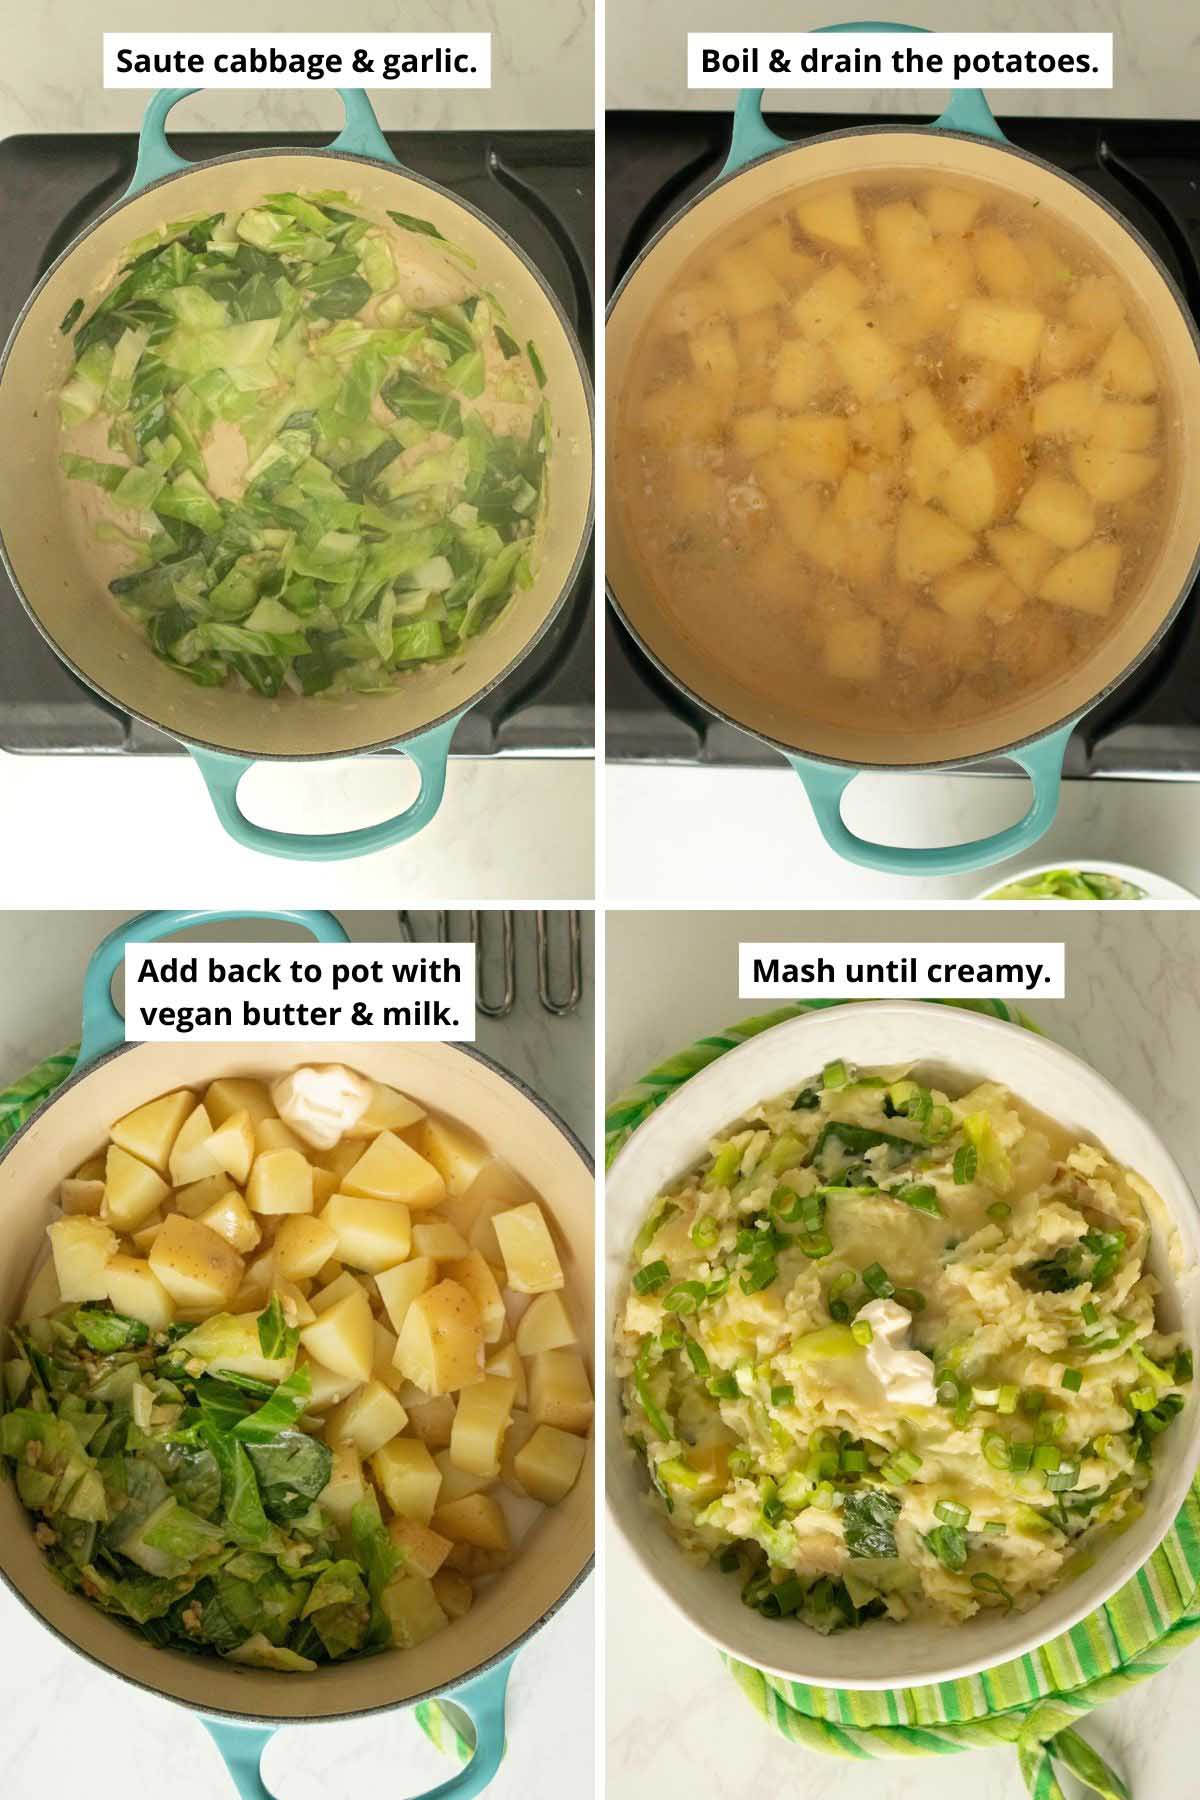 image collage showing the cooked cabbage, boiling the potatoes, the ingredients before and after mashing